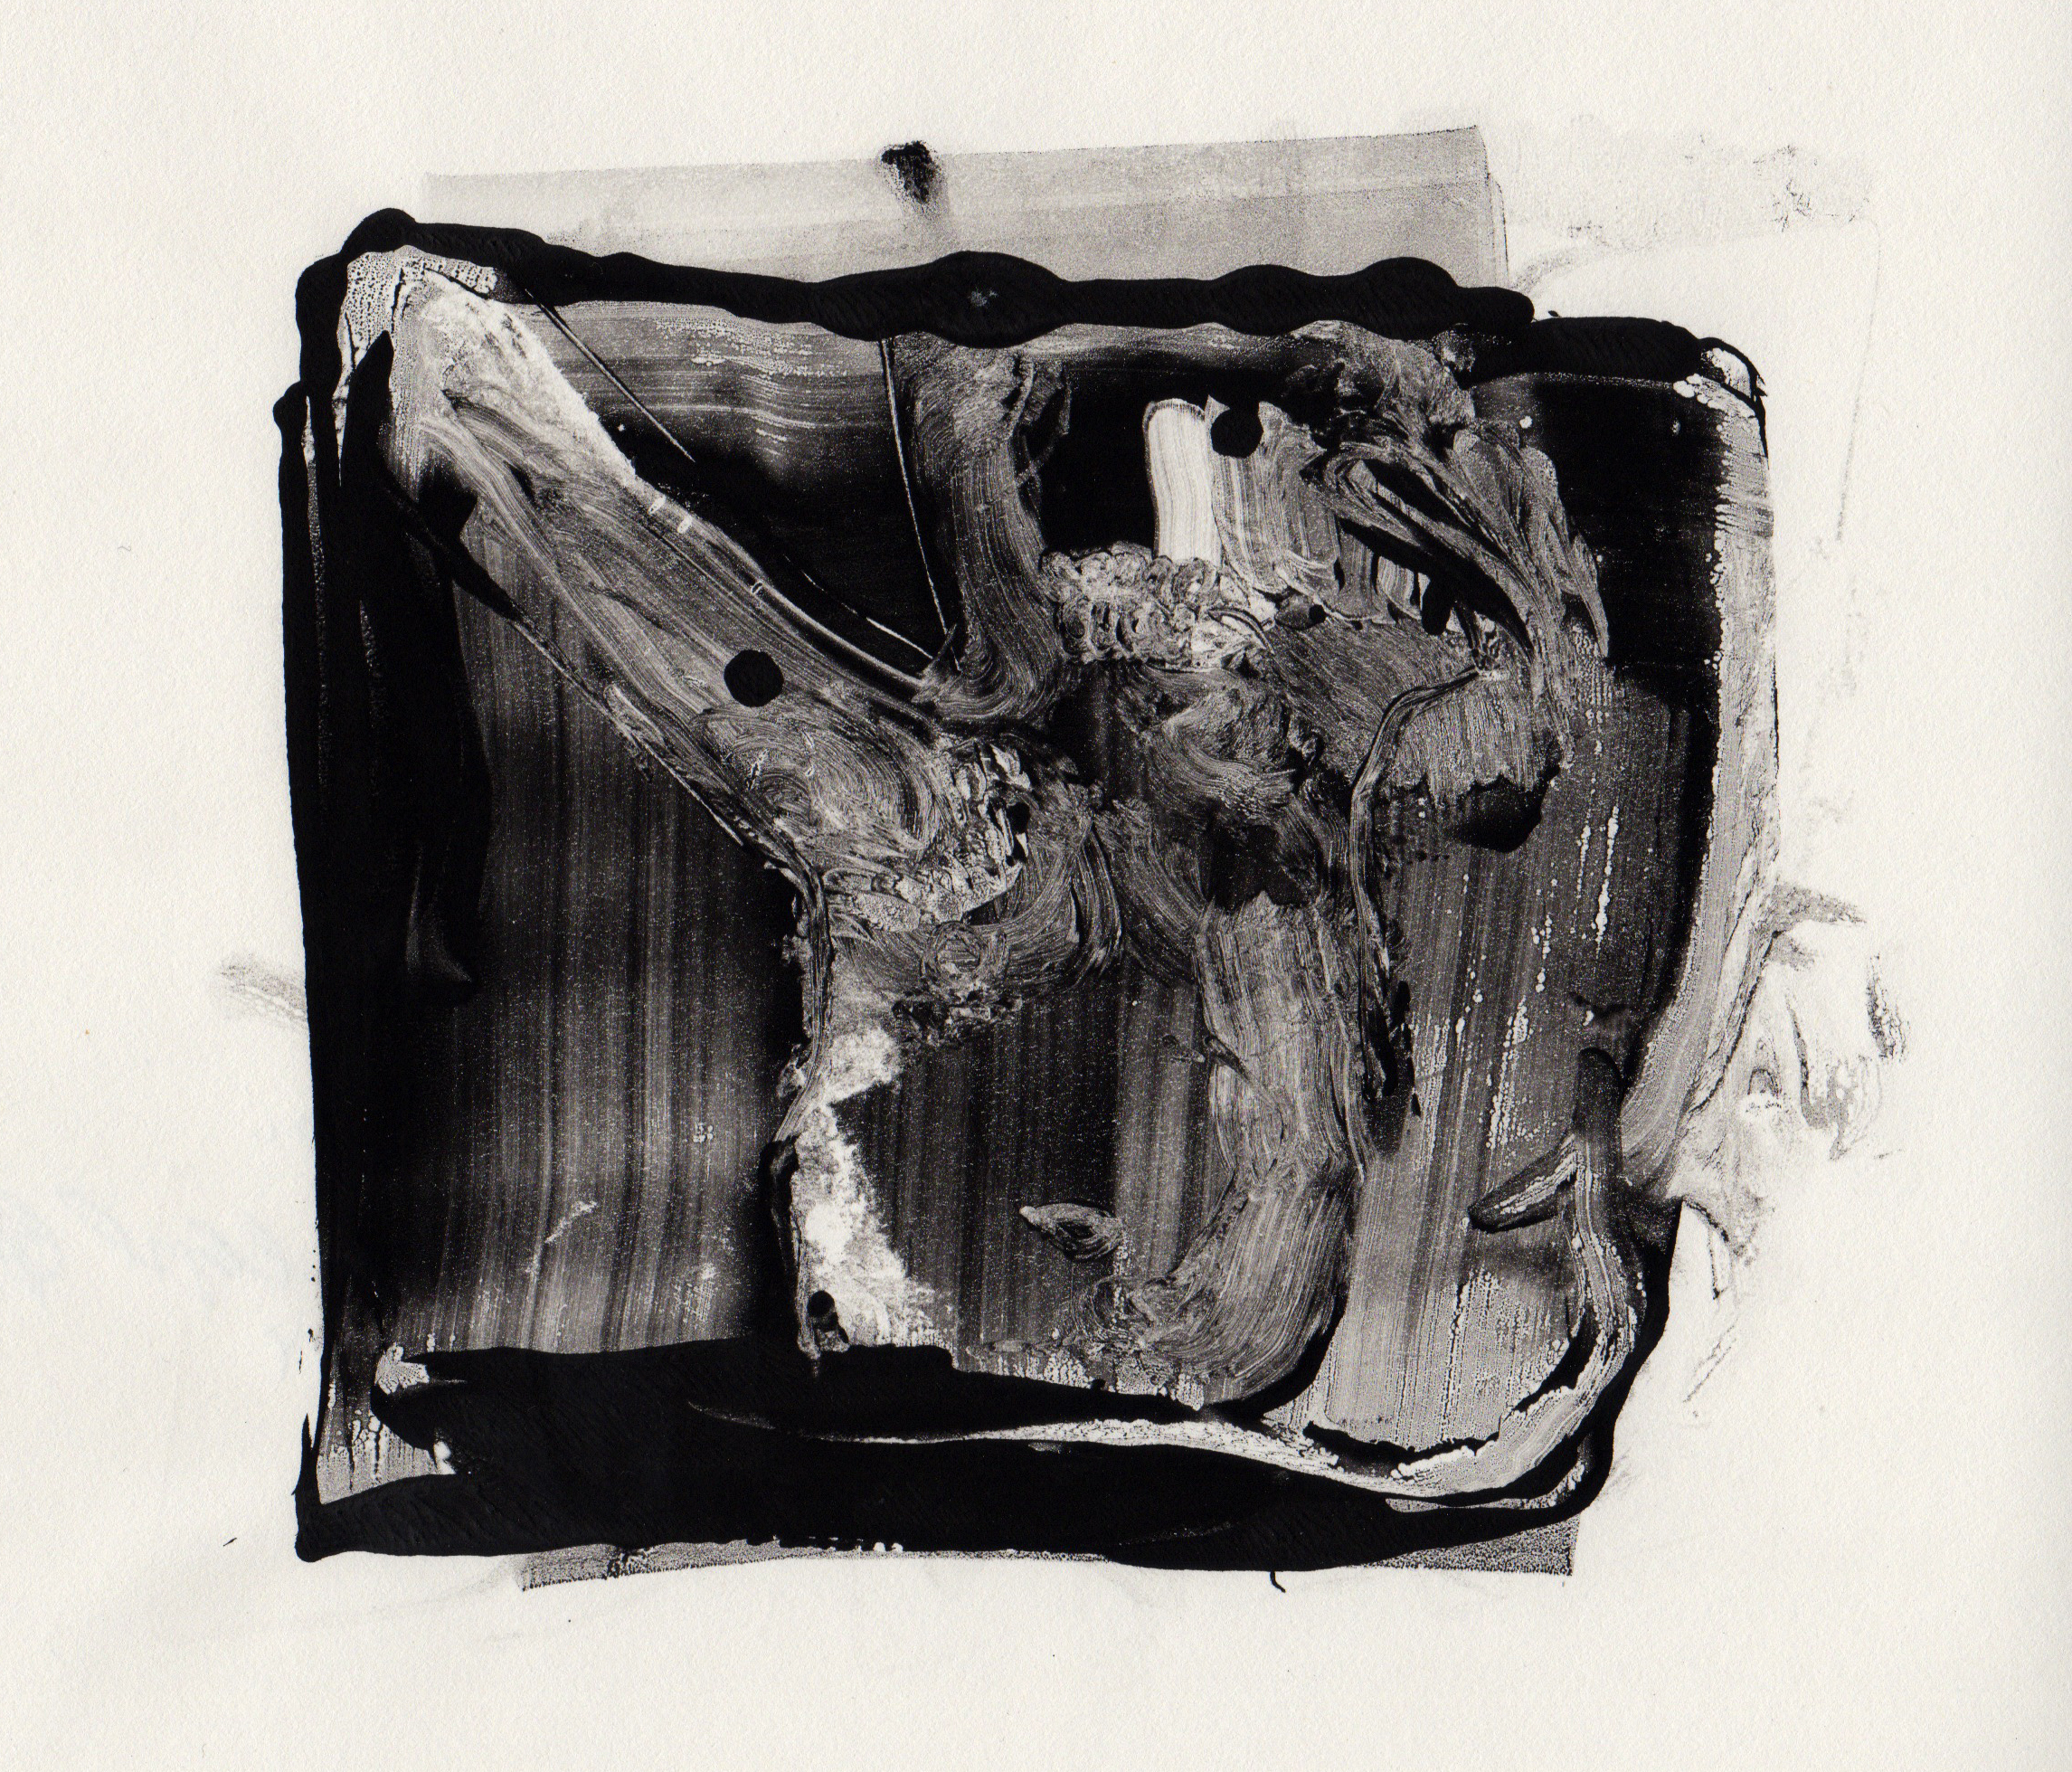 Canal, 2014, gelatin monotype, 10x9 inches